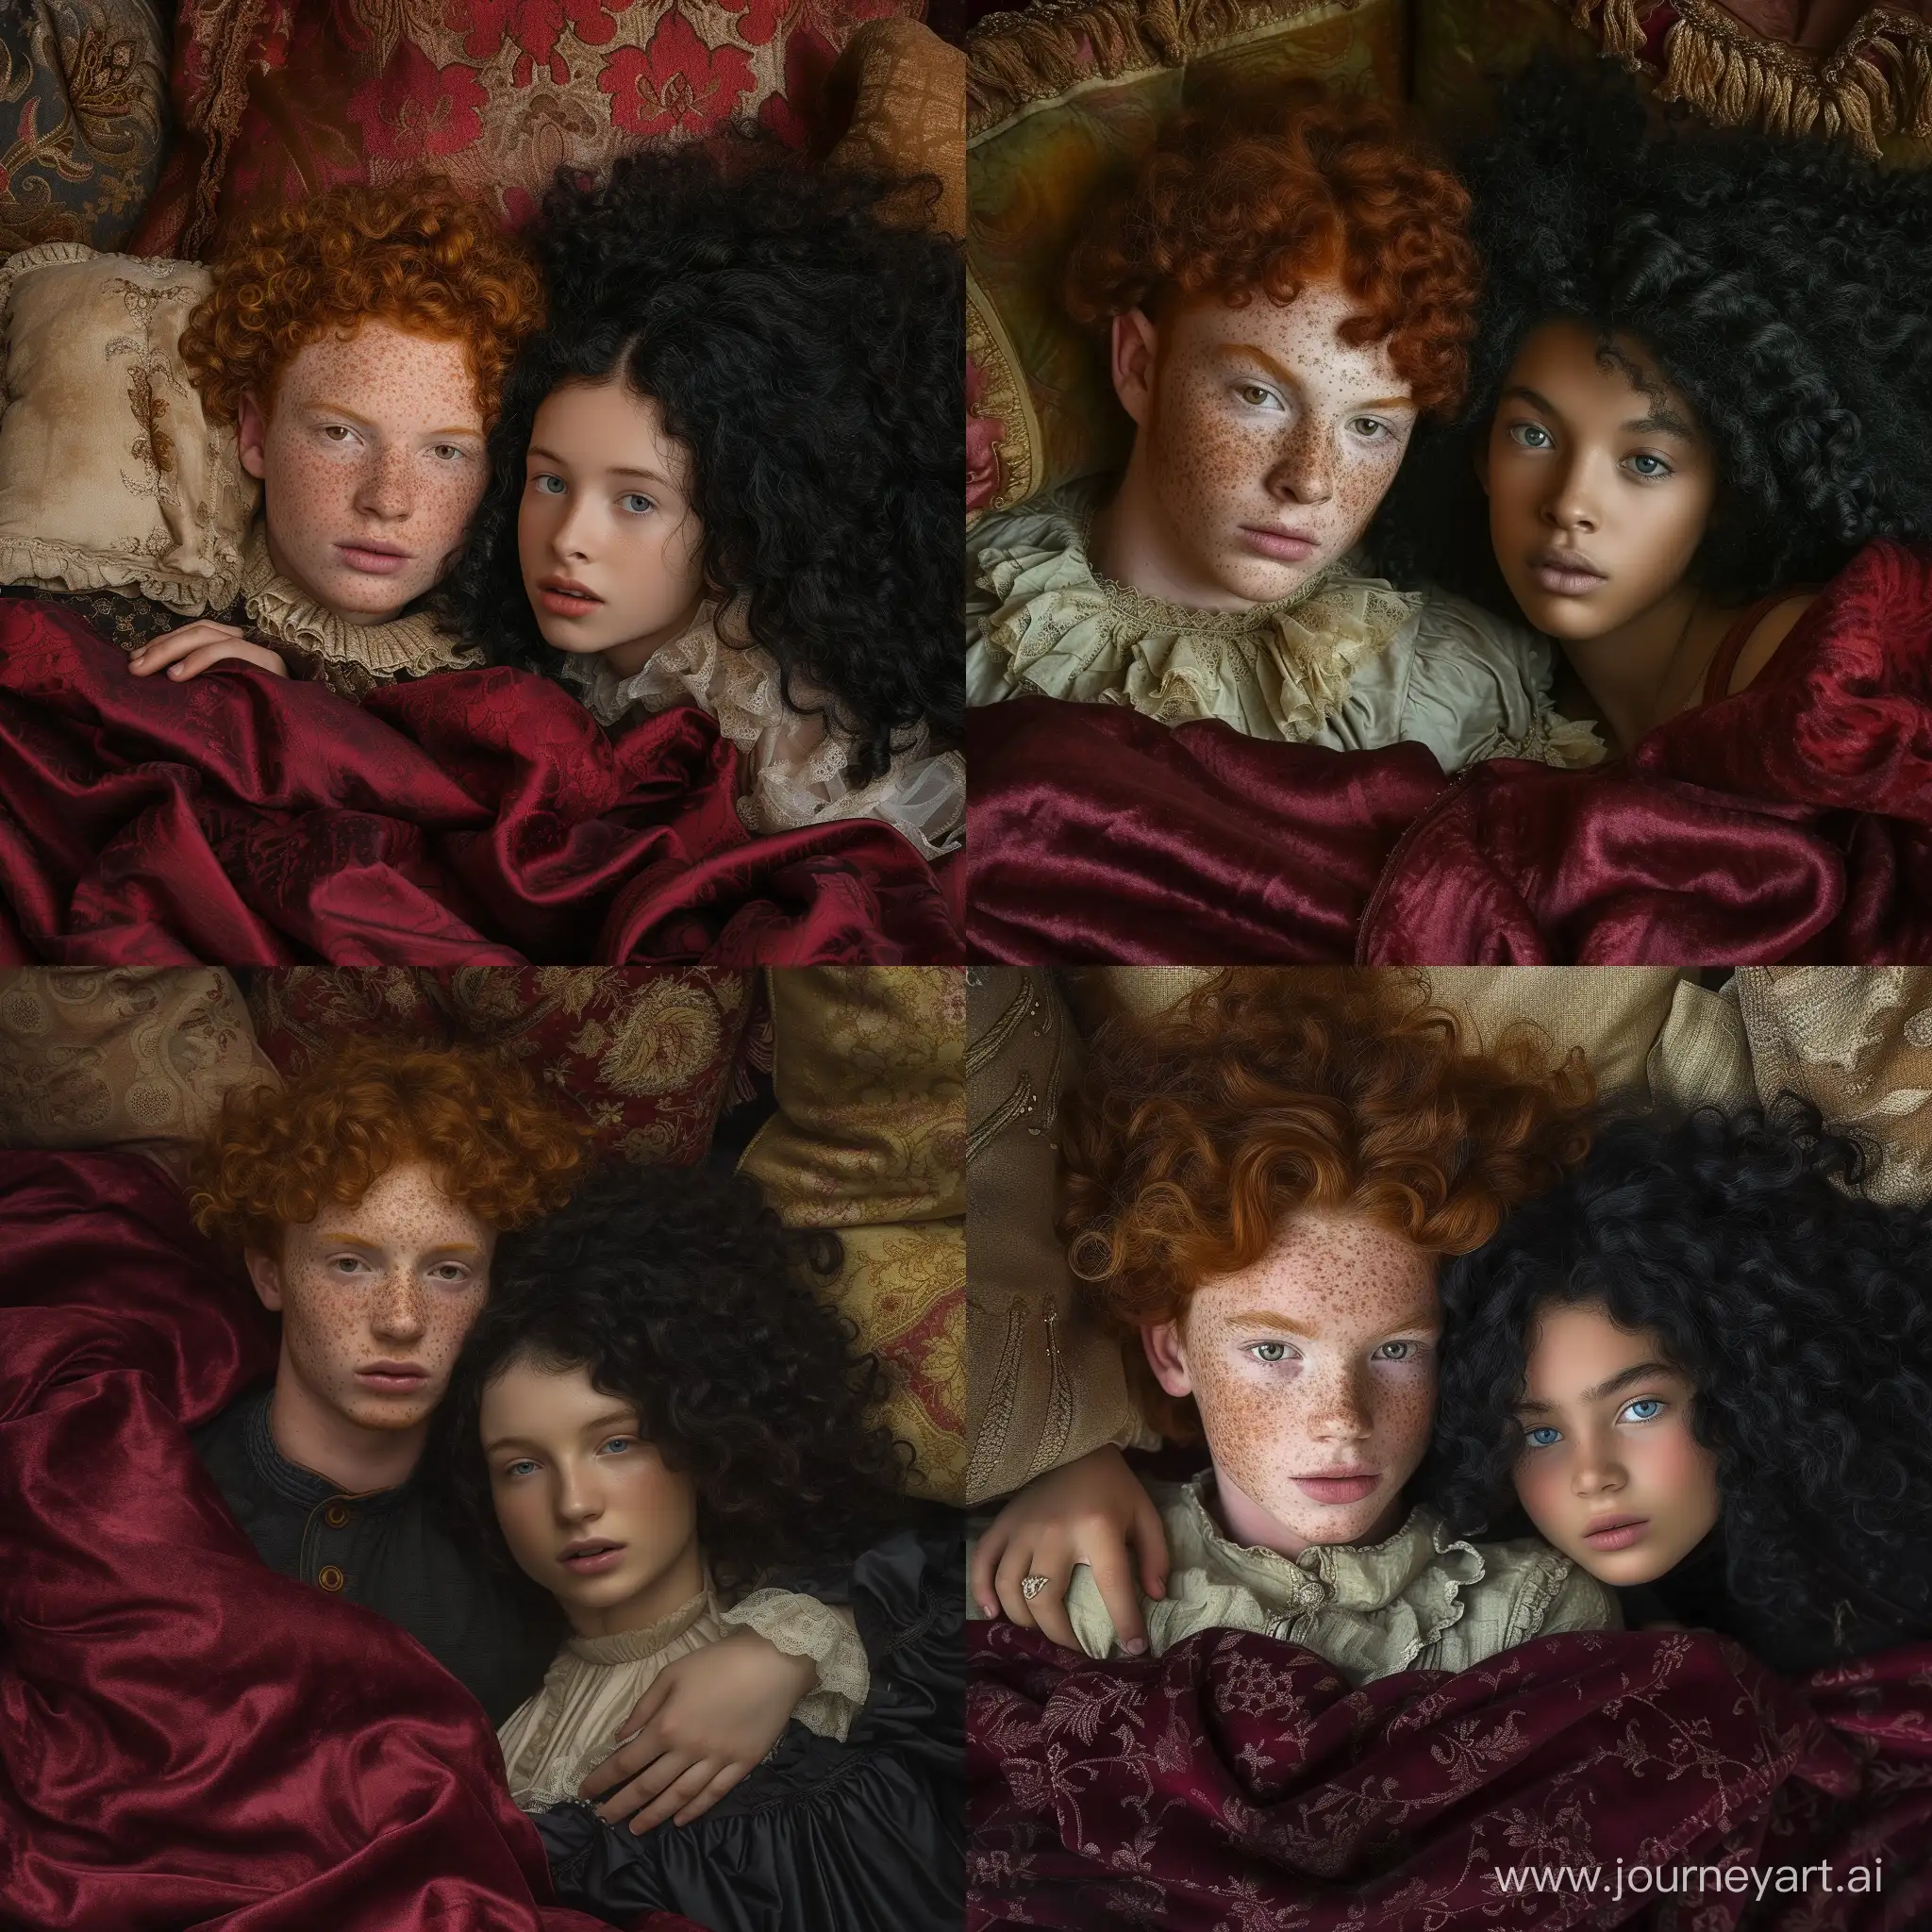 Romantic-Embrace-in-Antique-Setting-RedHaired-Guy-and-CurlyHaired-Girl-on-a-Soft-Bed